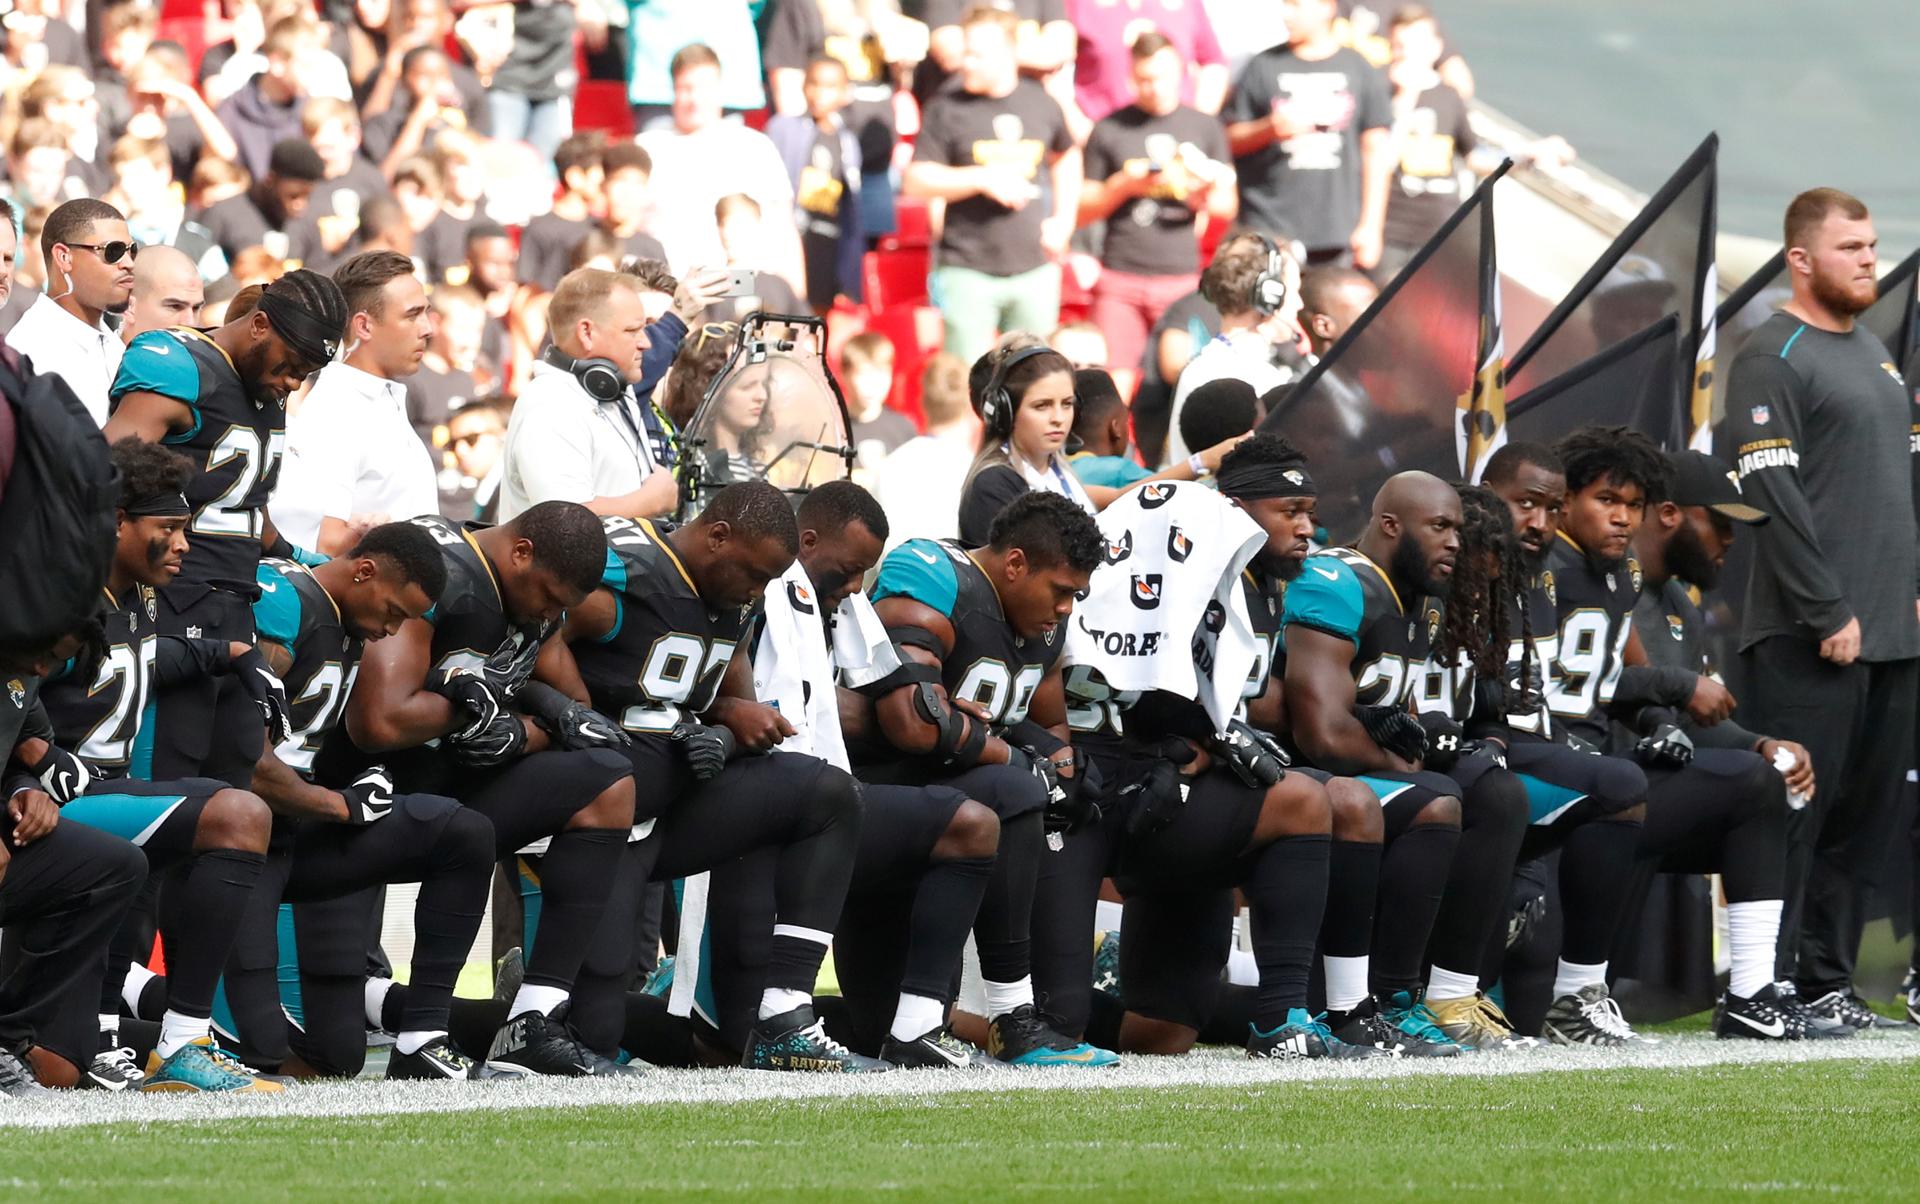 Jacksonville Jaguars players kneel during the US national anthem before their game against the Baltimore Ravens.